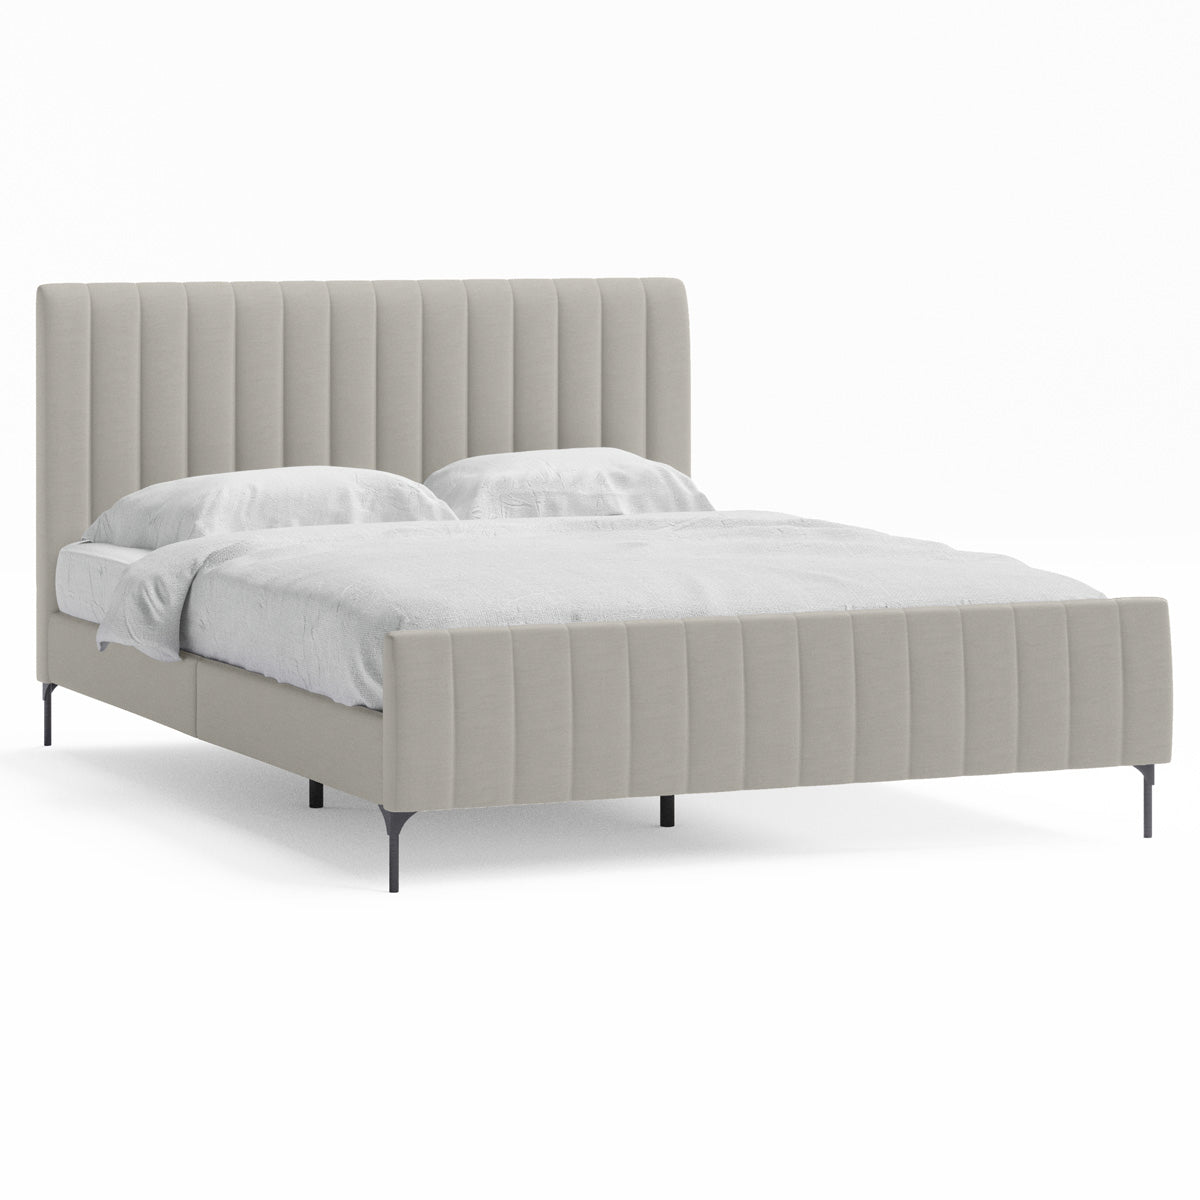 Coco Fabric Upholstered Bed Frame (Natural Beige)